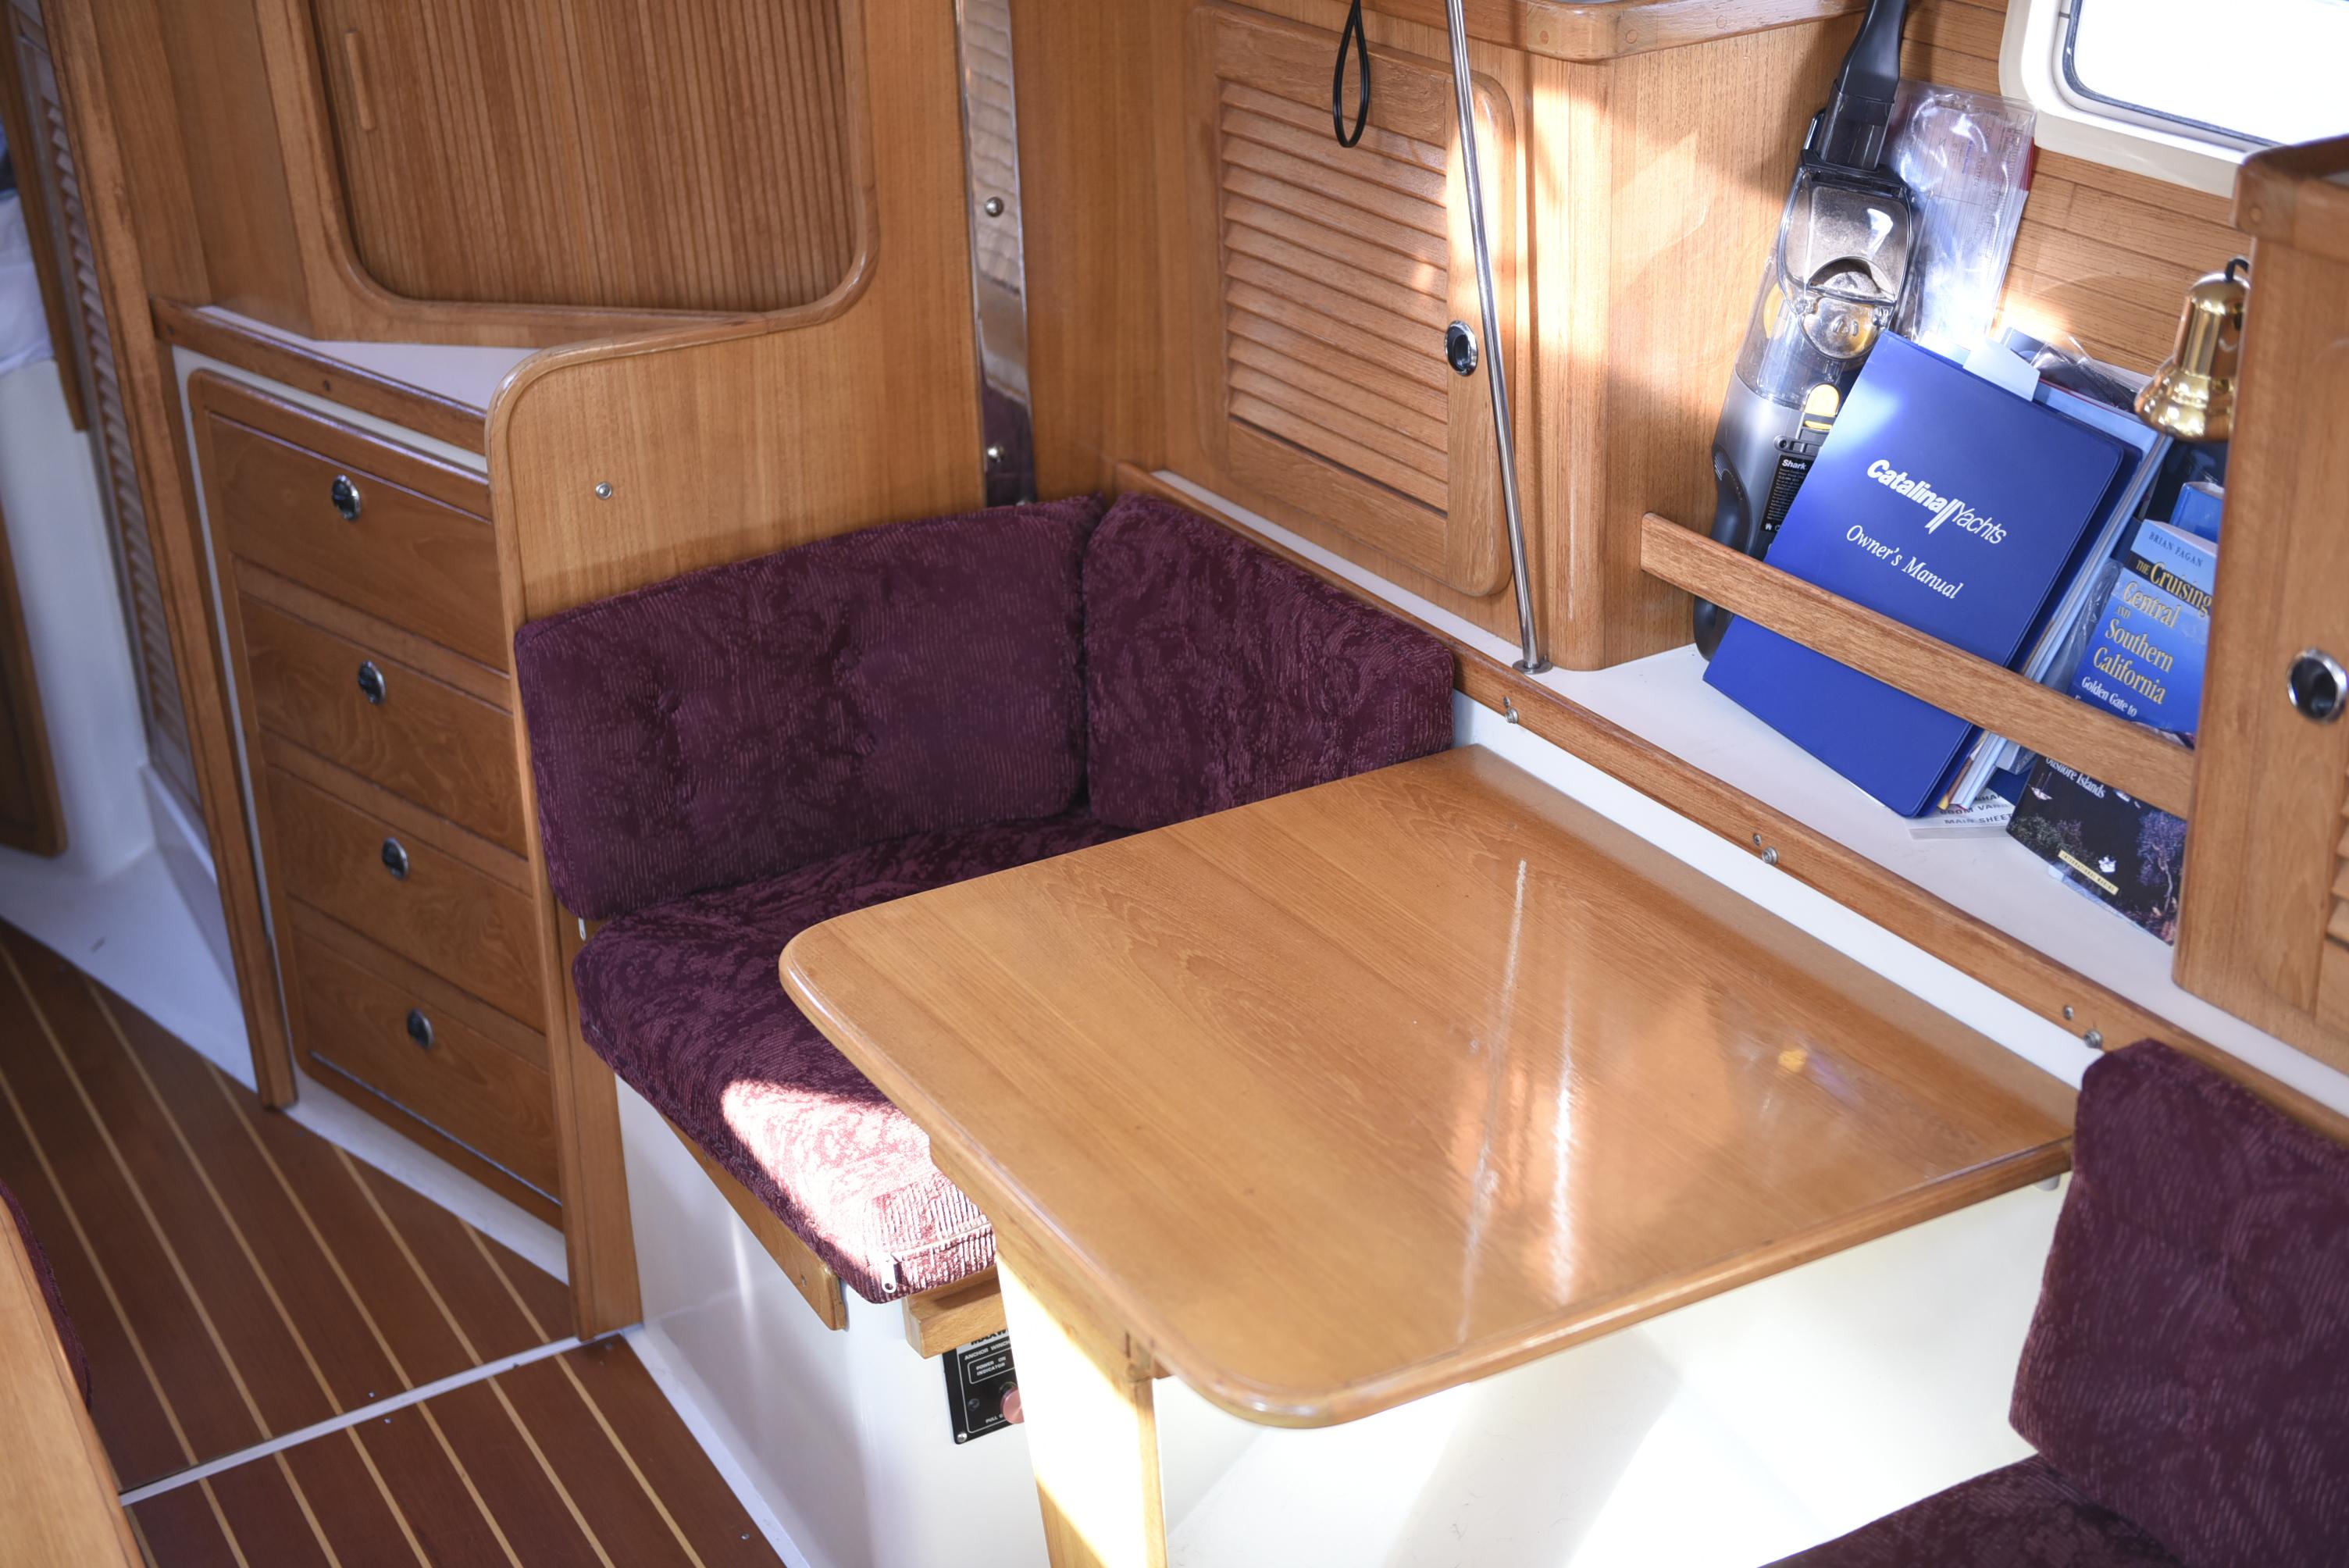 Individual seats and table on Starboard convert to single berth